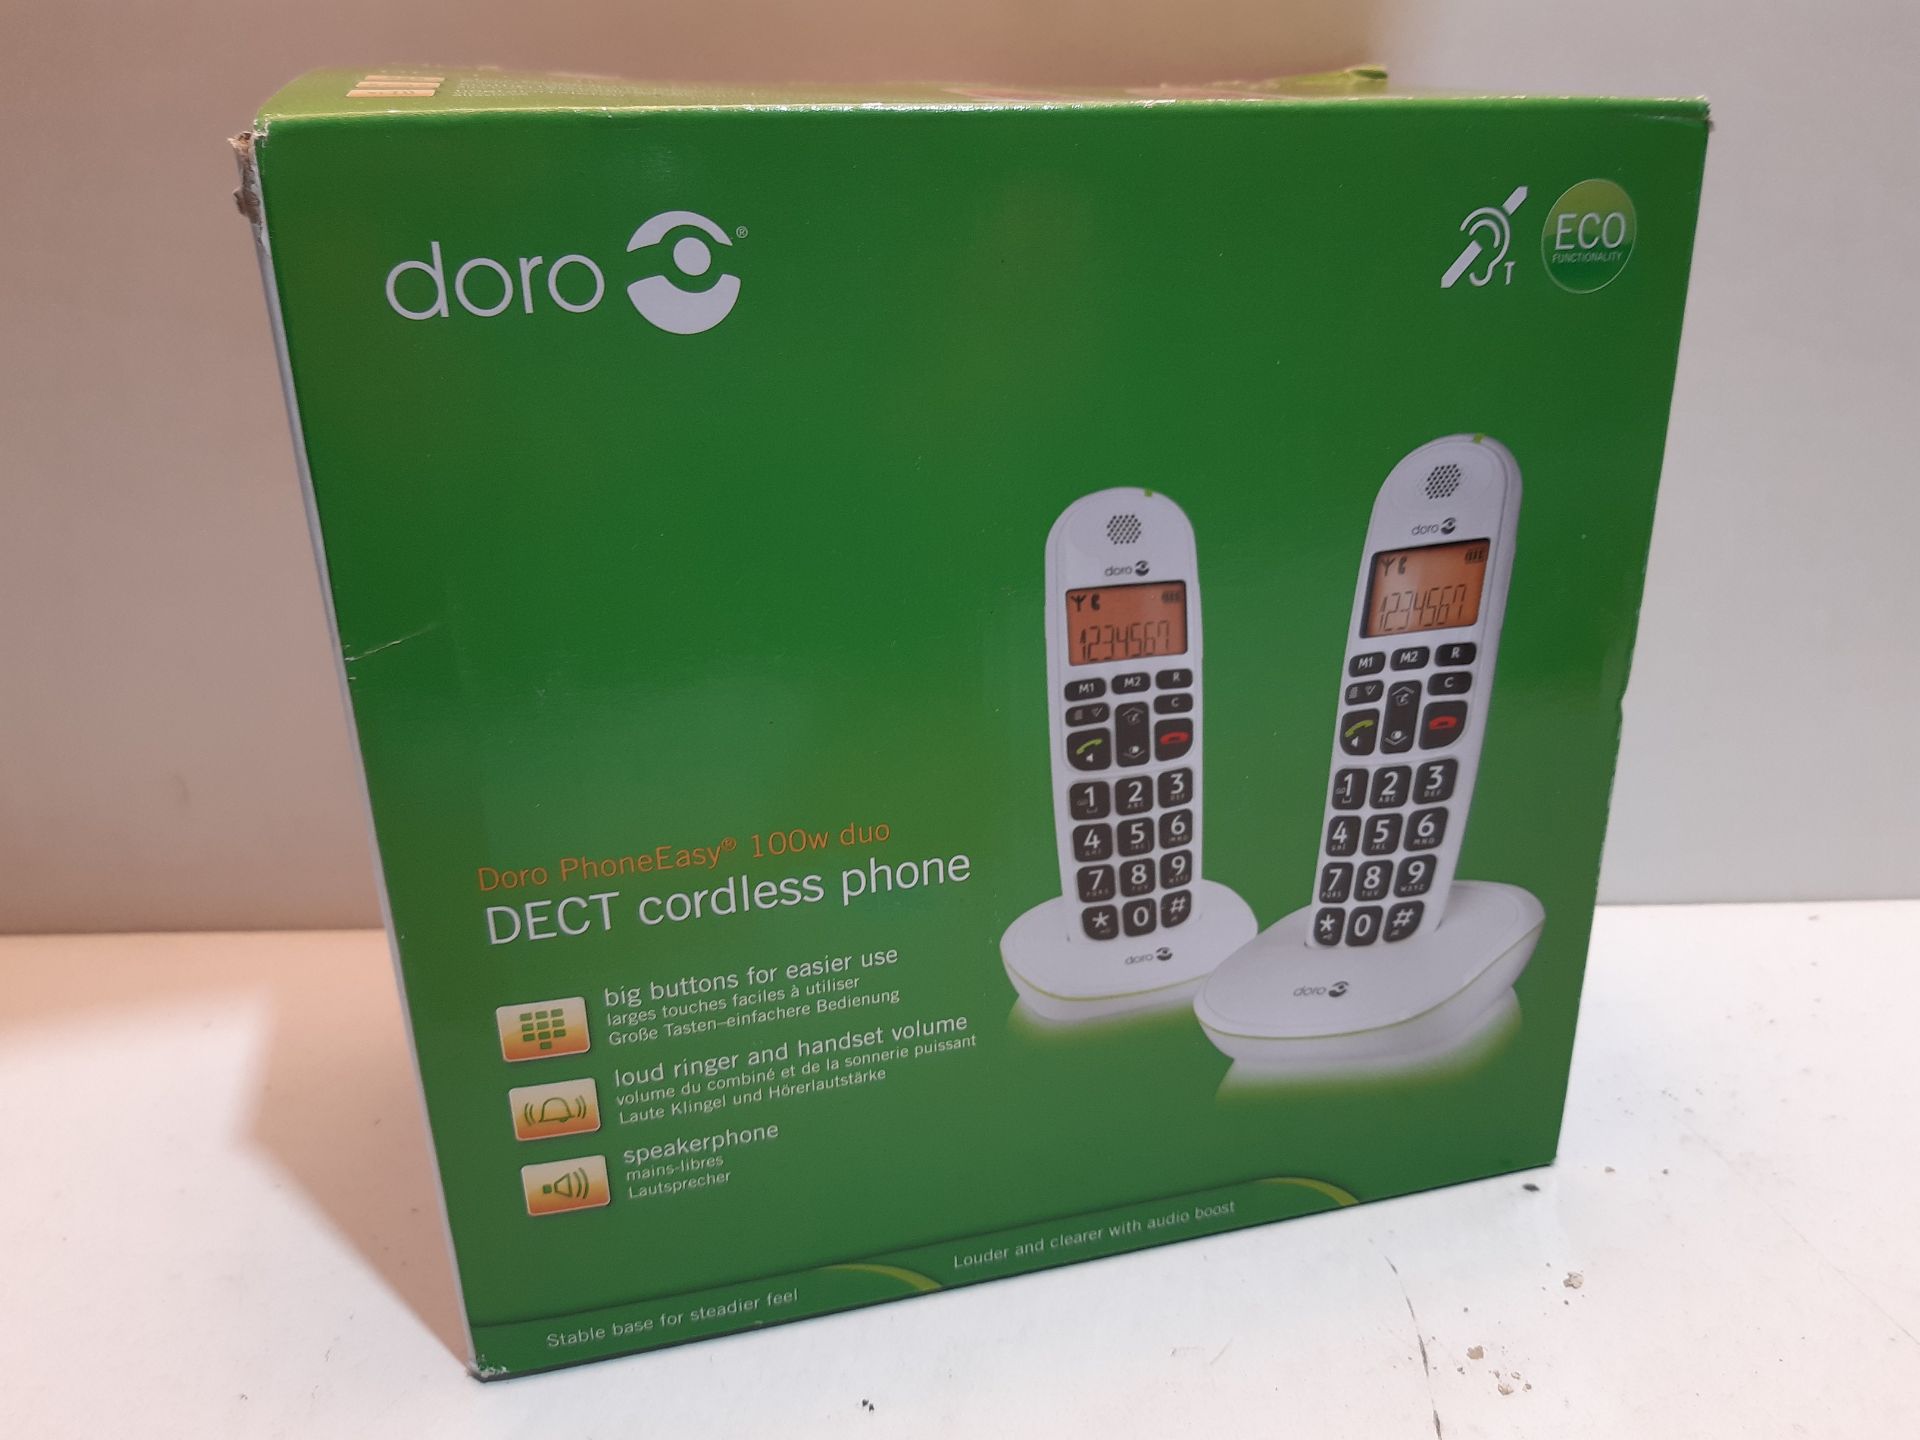 RRP £52.49 Doro PhoneEasy 100W DECT Cordless Phone with Amplified Sound and Big Buttons - Image 2 of 2